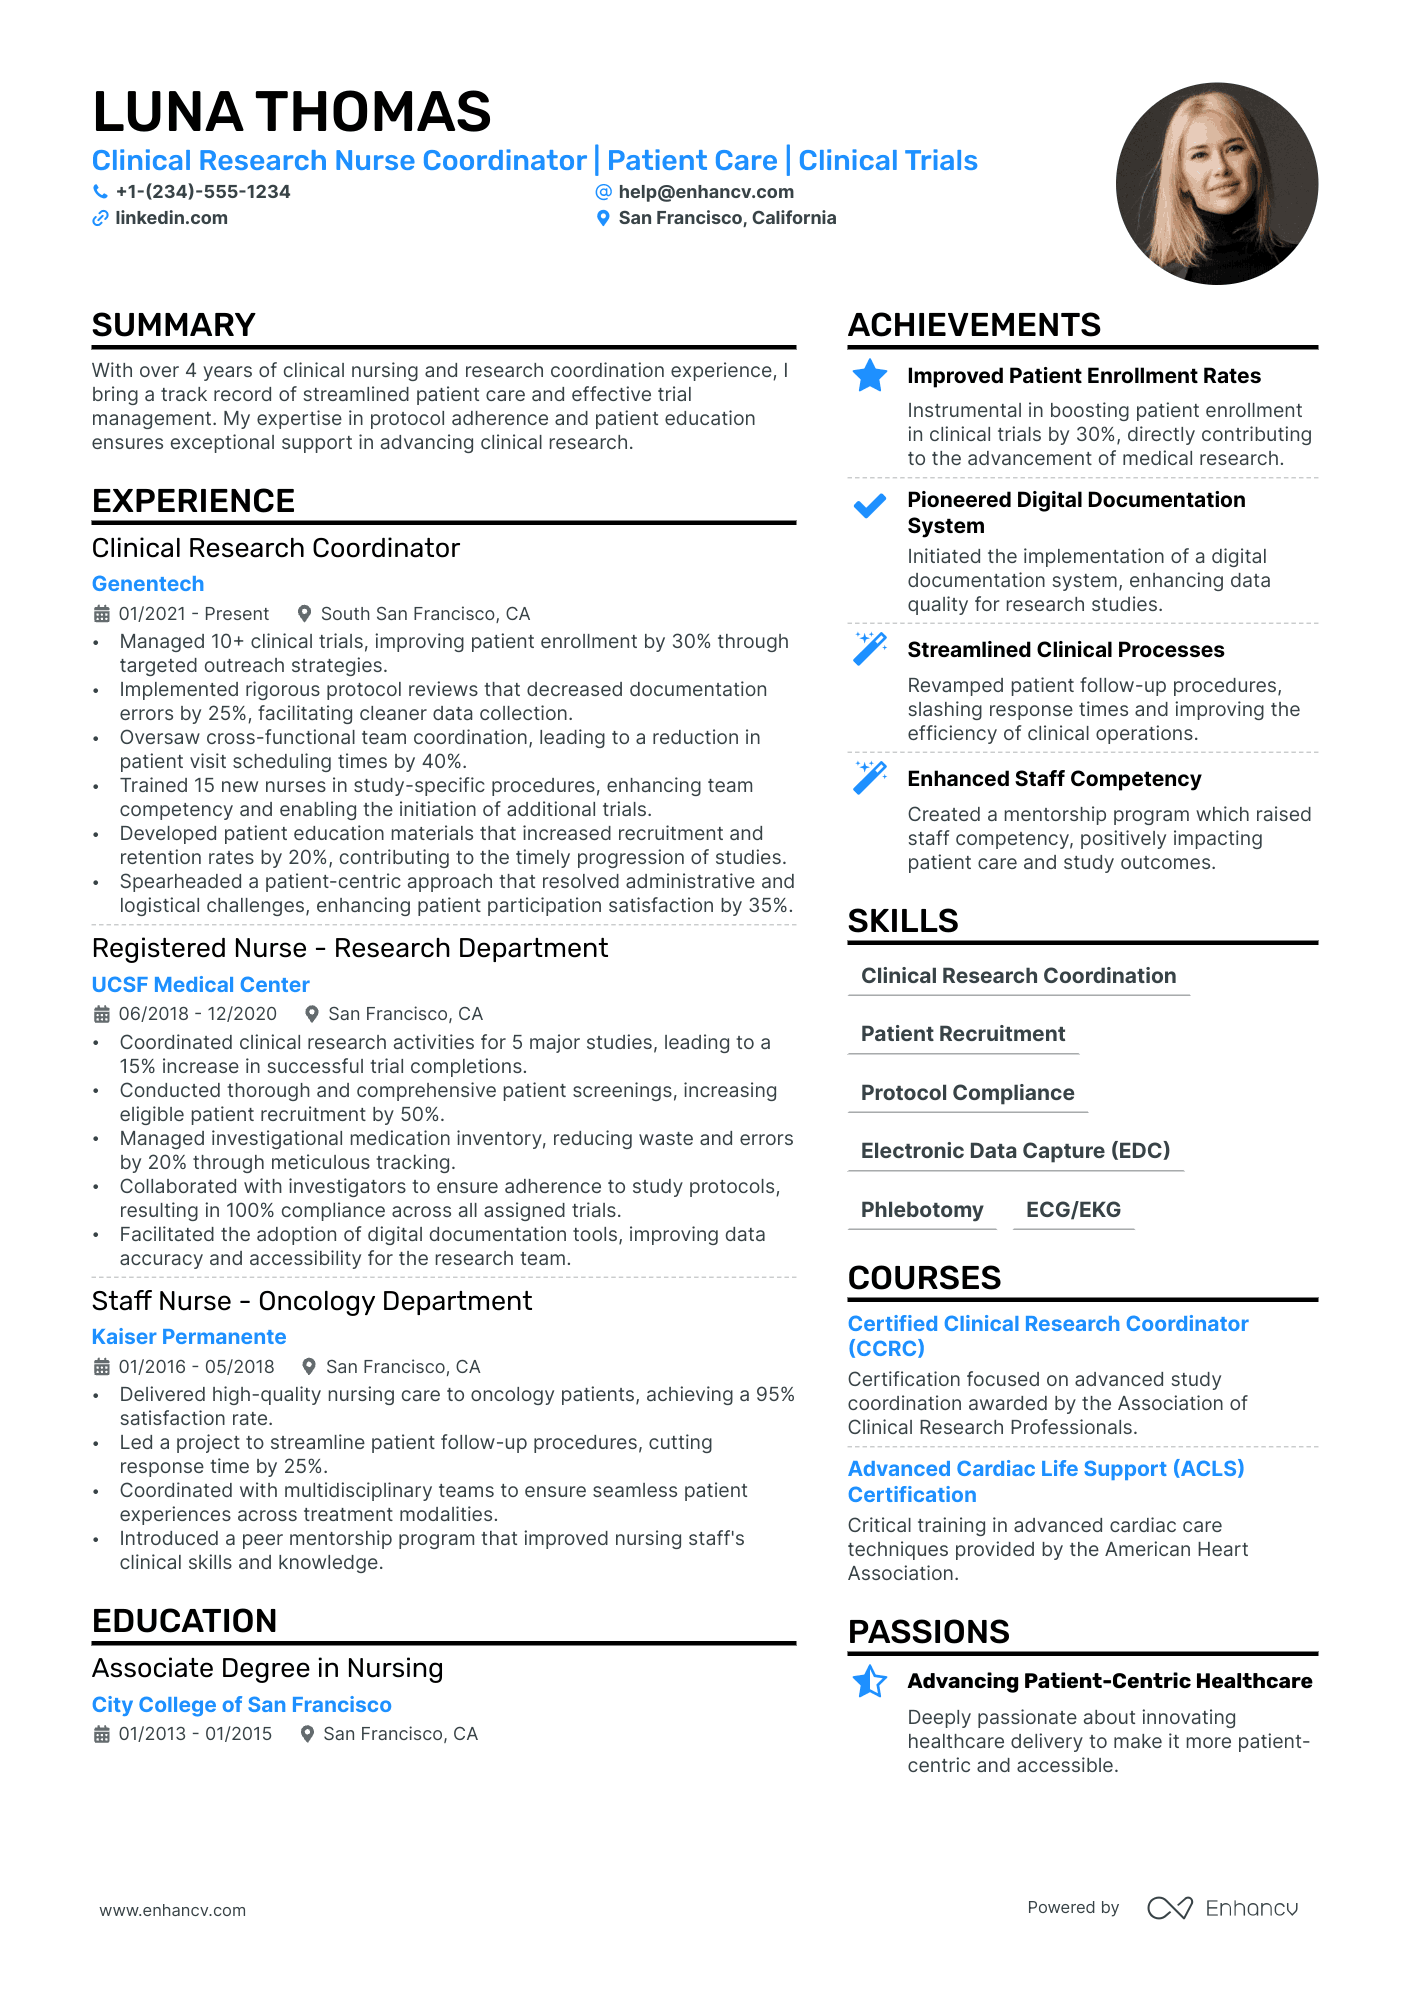 Clinical Research Nurse resume example